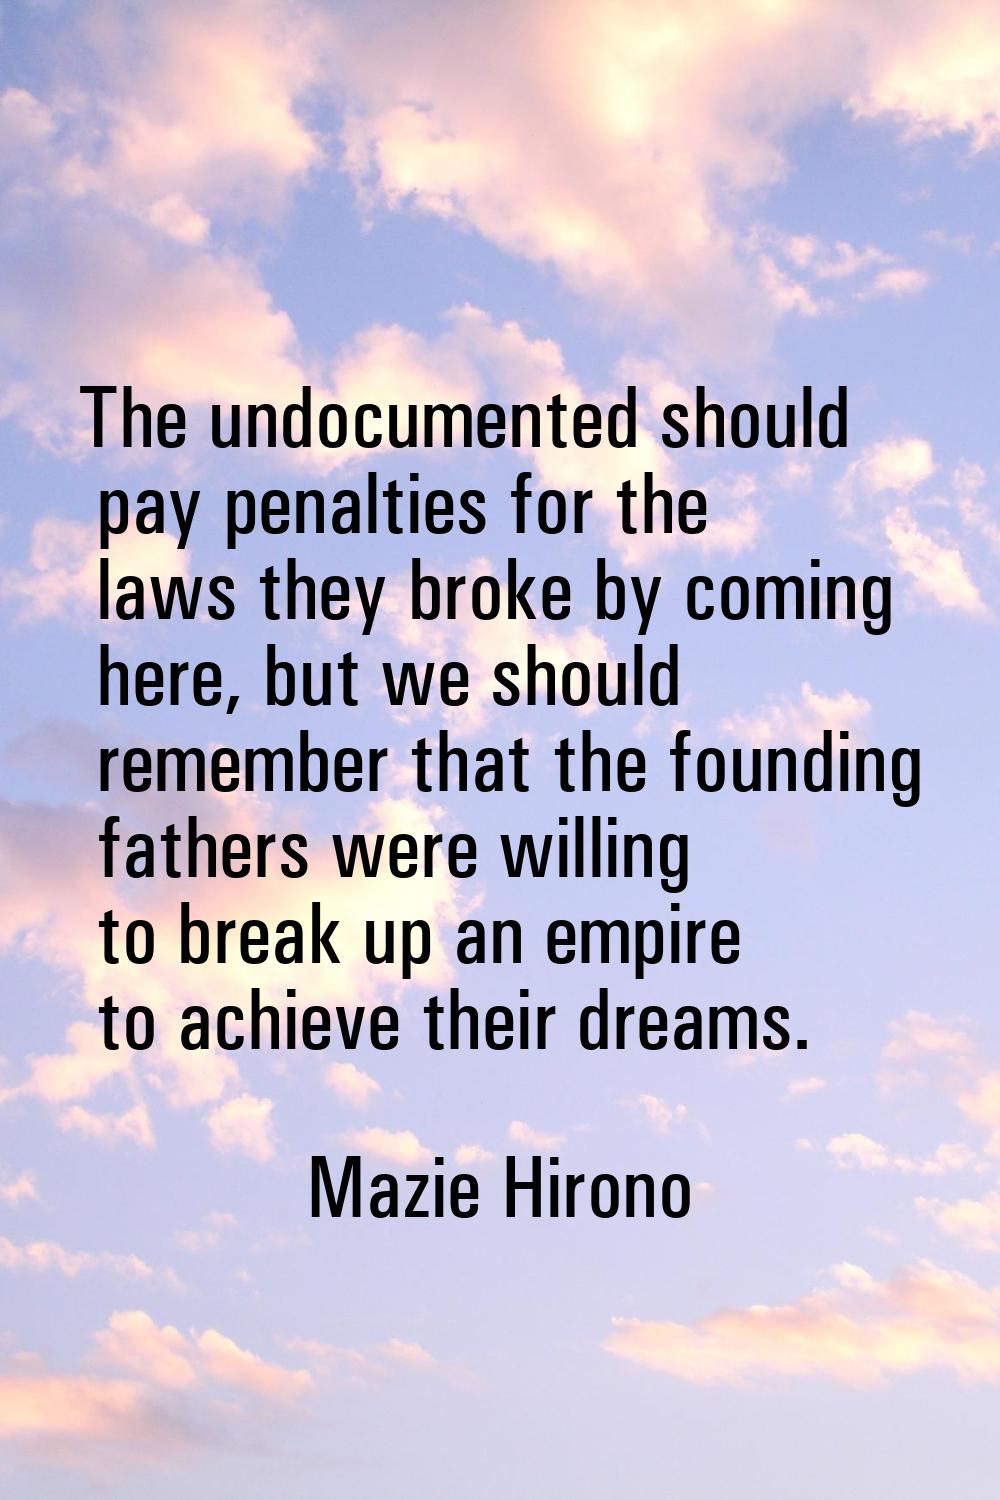 The undocumented should pay penalties for the laws they broke by coming here, but we should remembe